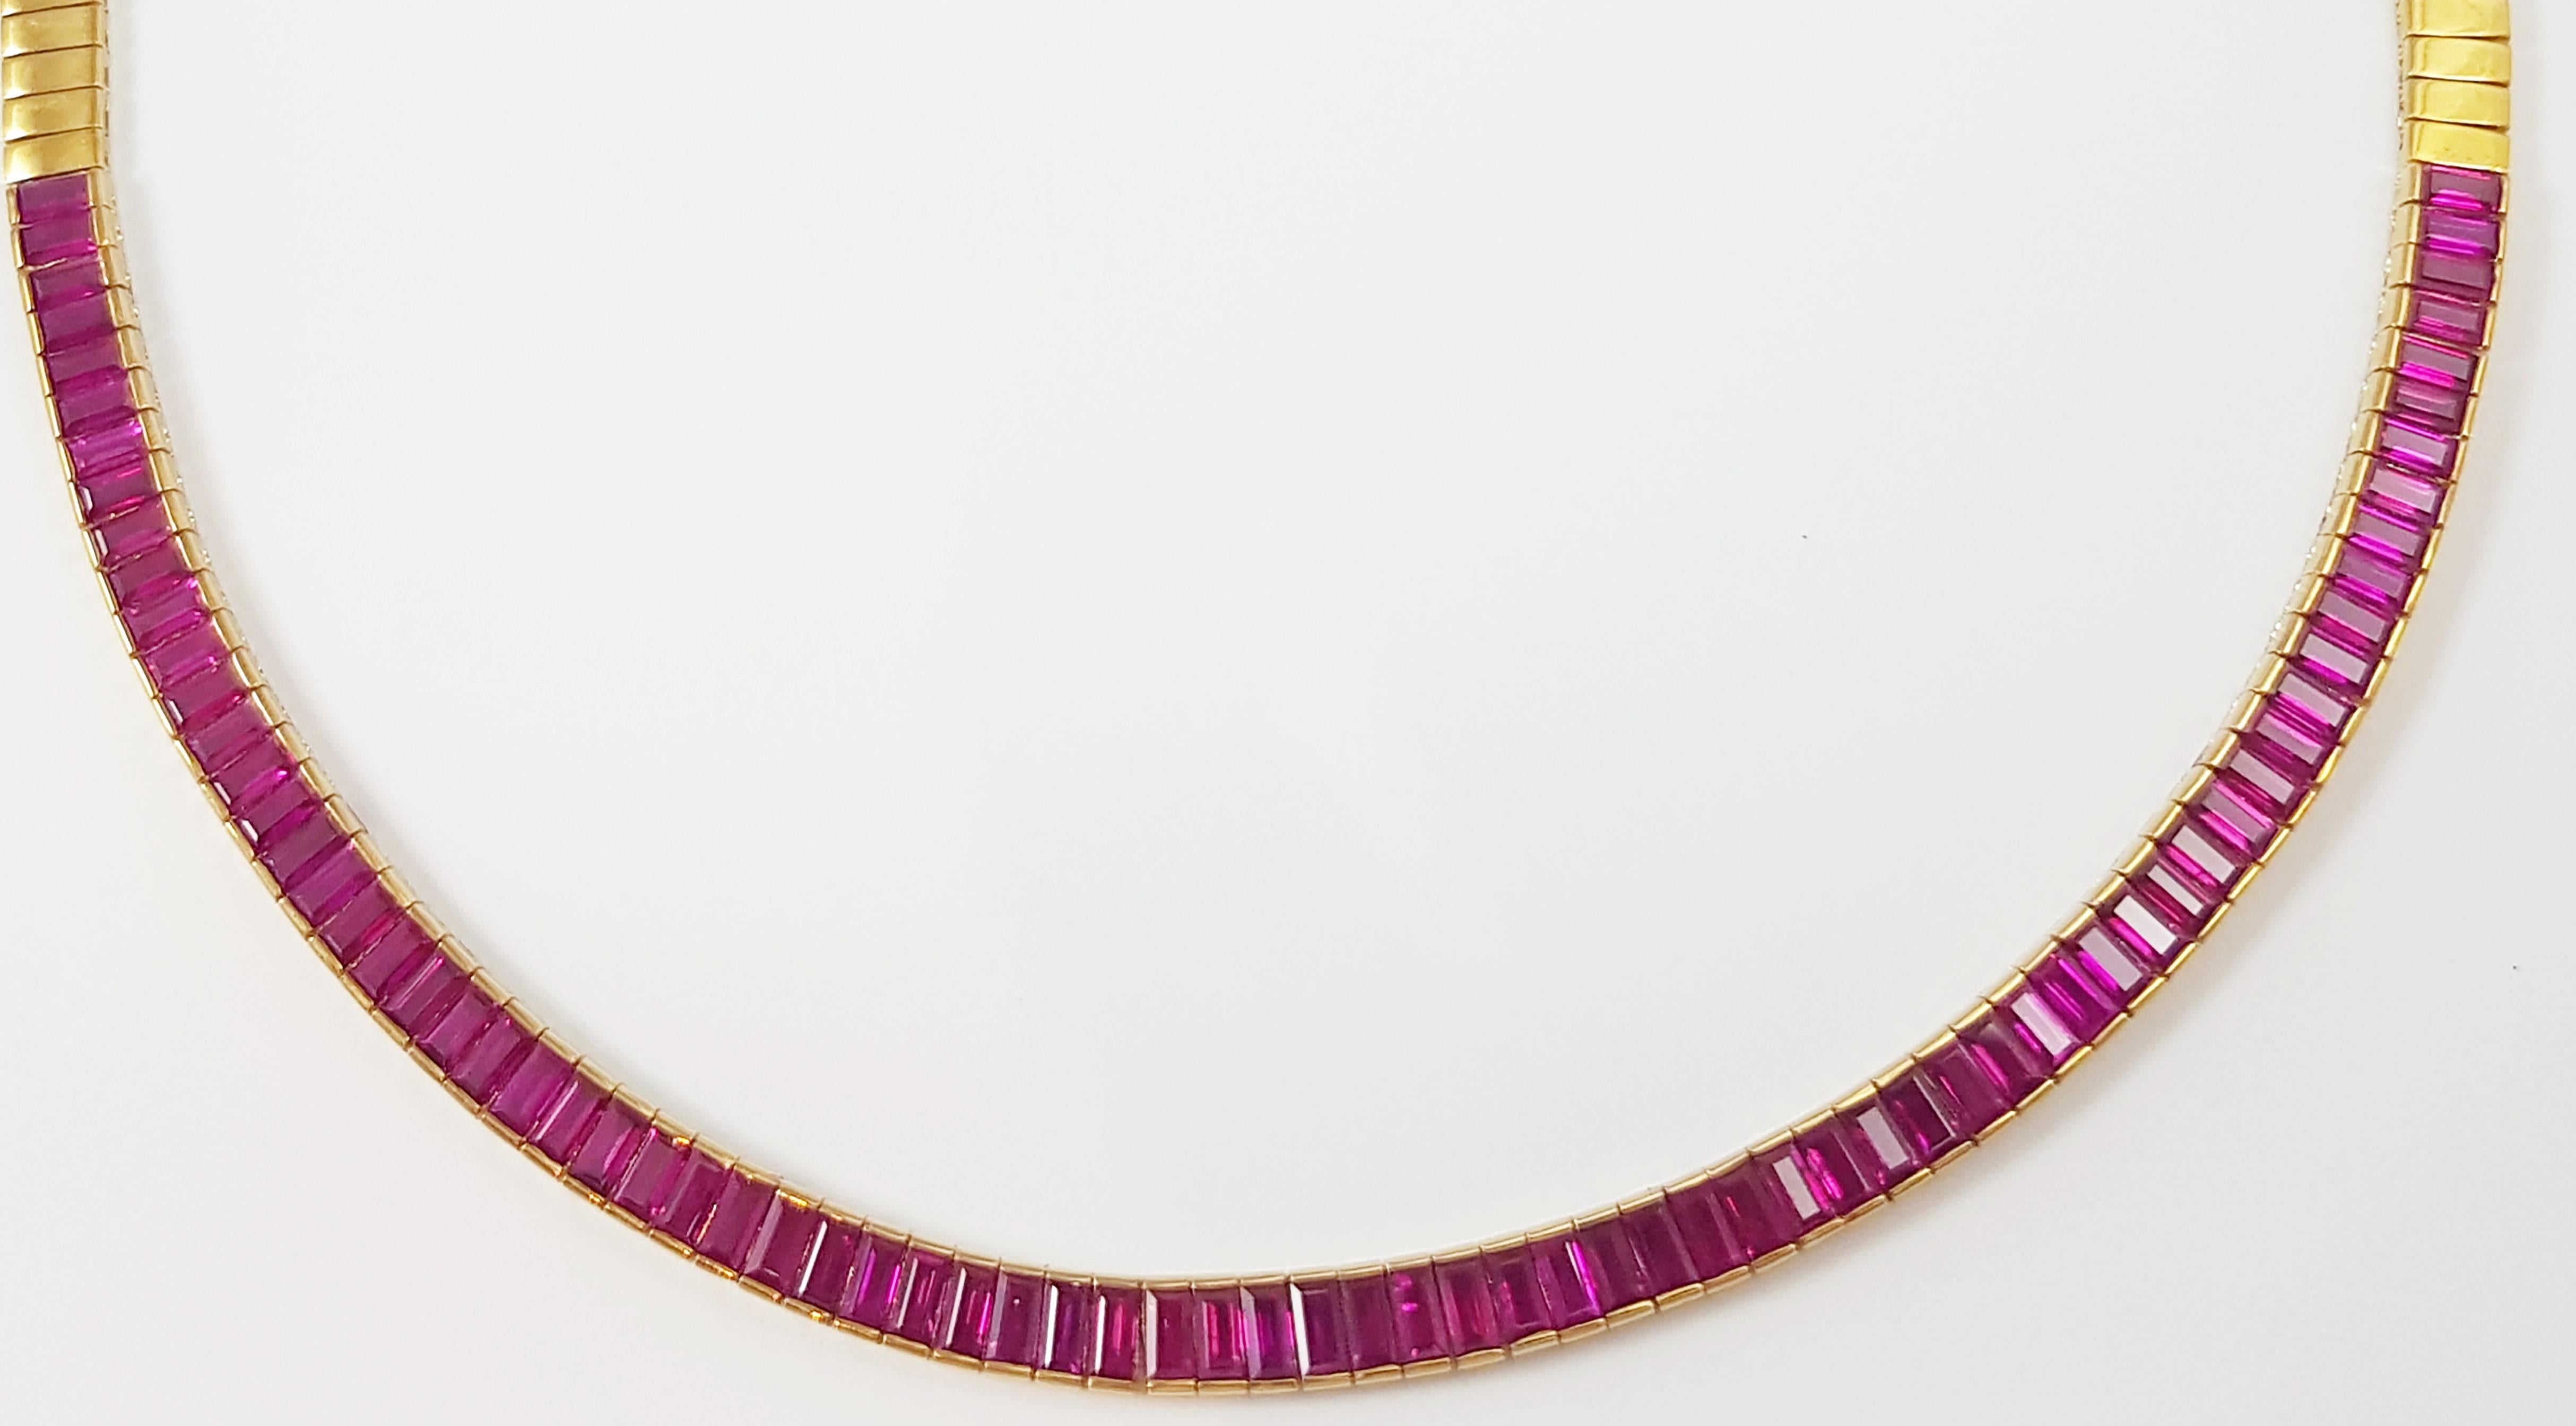 Ruby 12.07 carats Necklace set in 18 Karat Gold Settings

Width:  0.5 cm 
Length: 42.0cm
Total Weight: 43.13 grams

